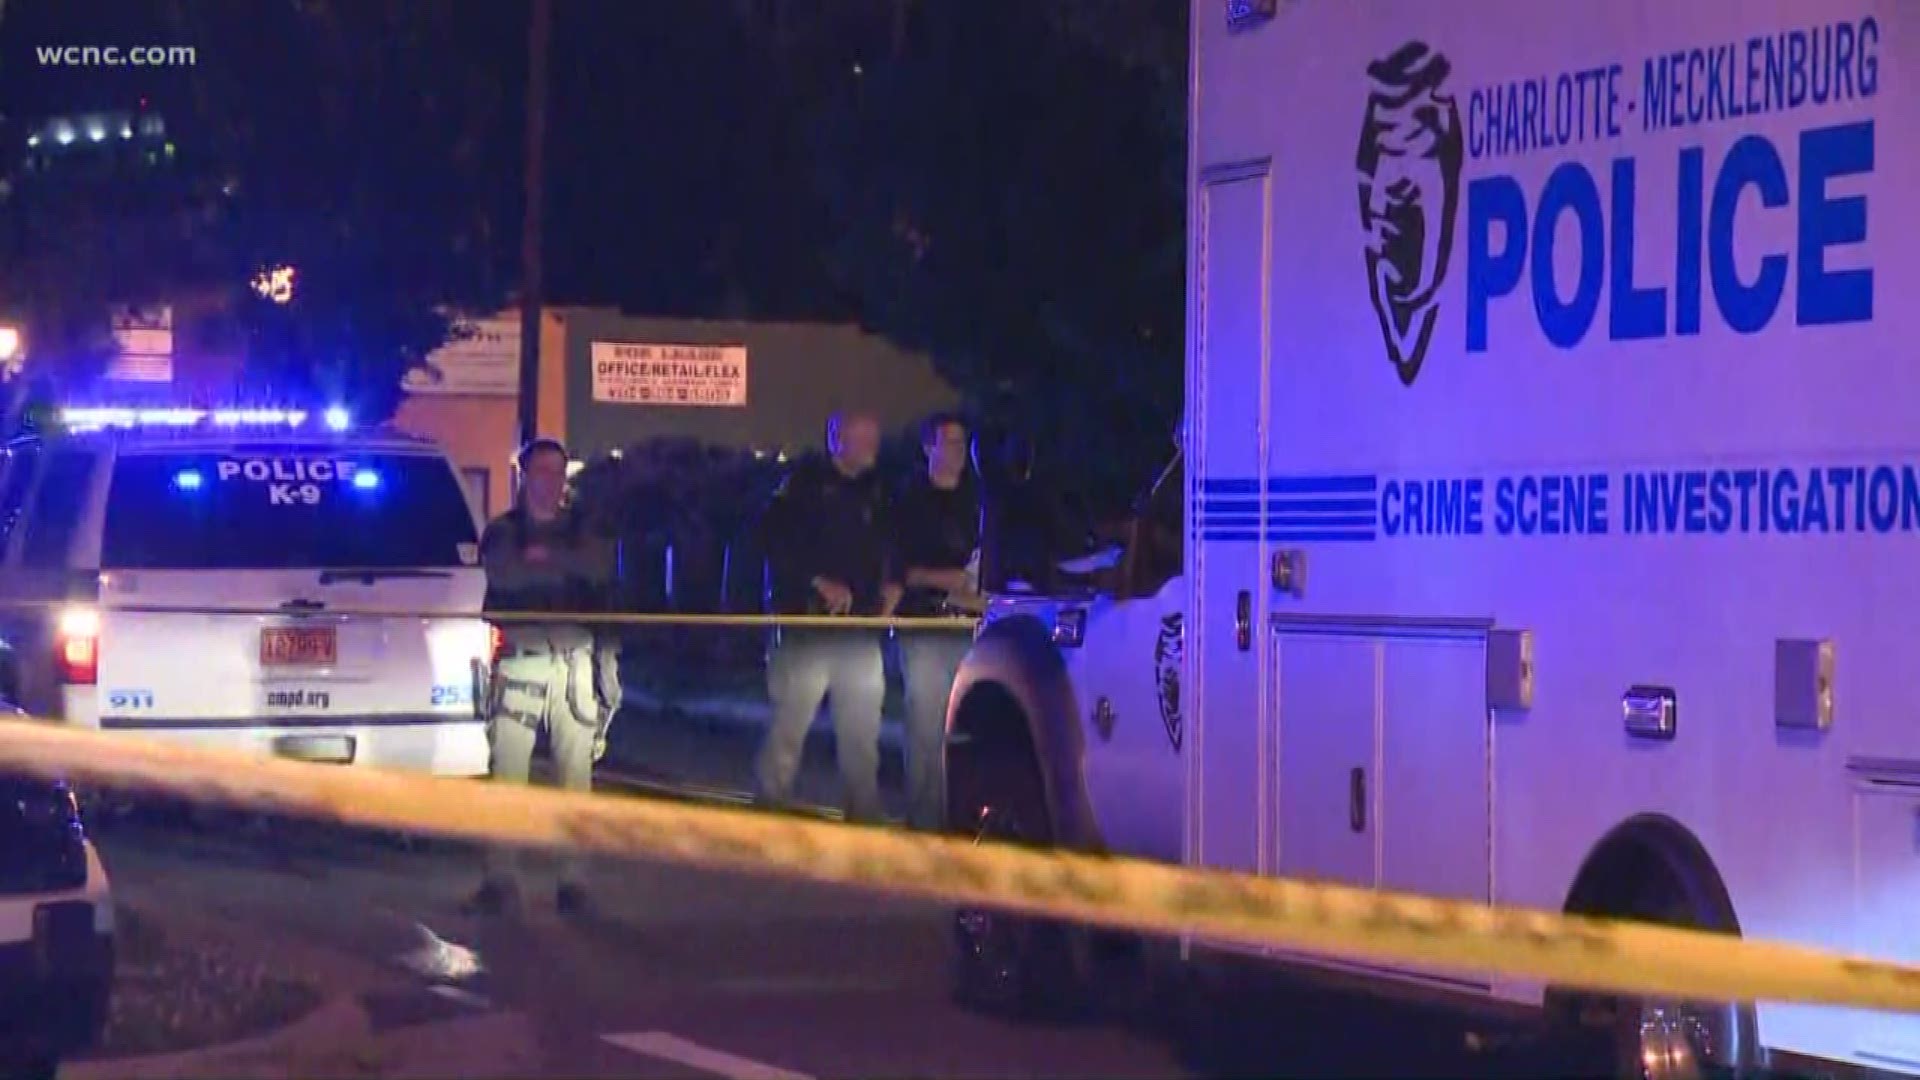 Charlotte-Mecklenburg Police are investigating after a woman was fatally shot on North Tryon Street in uptown.